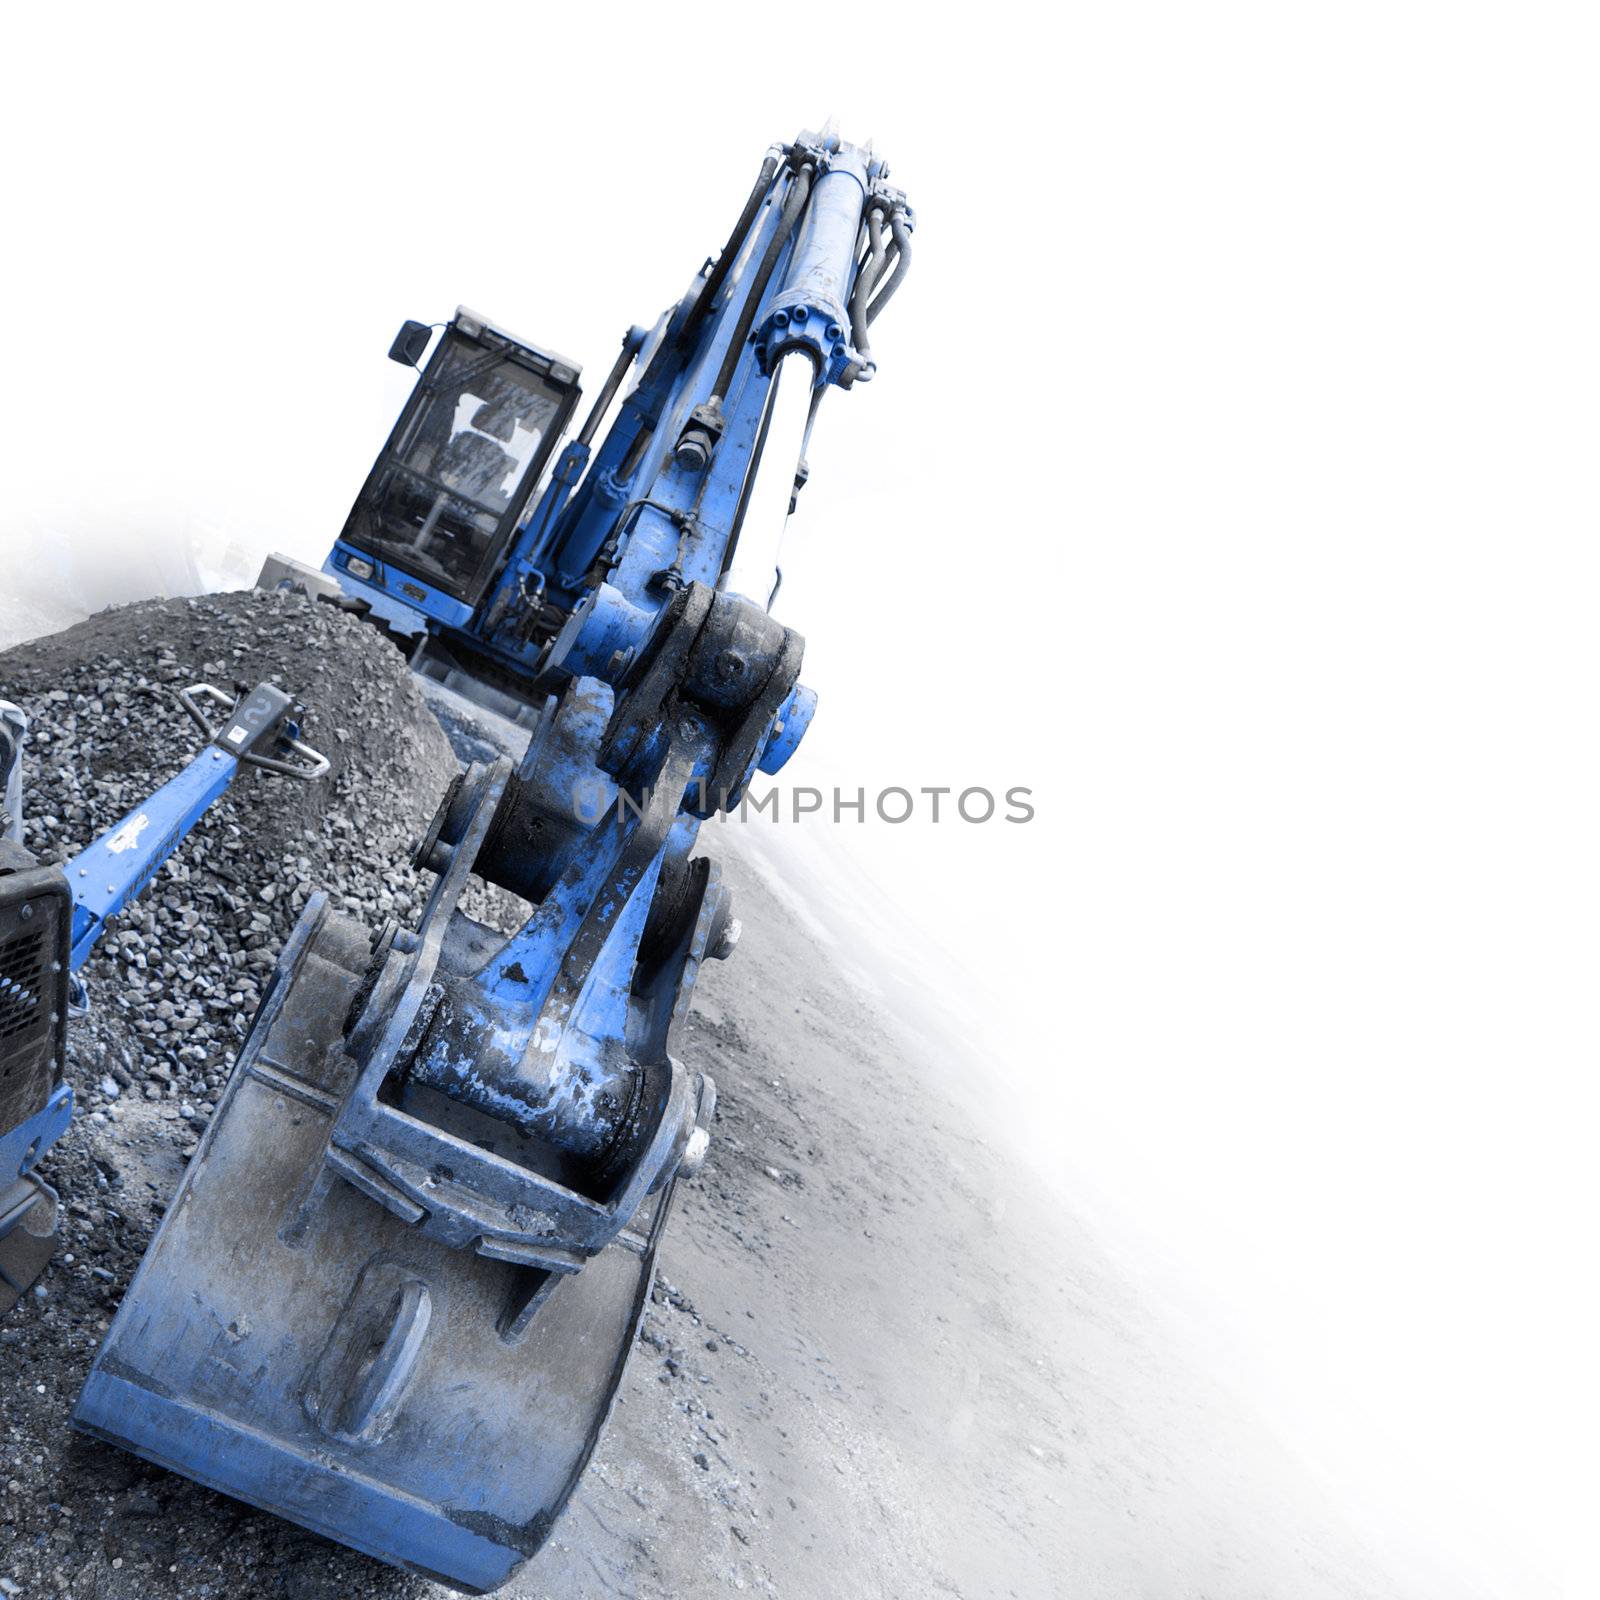 backhoe digging small stones by photochecker